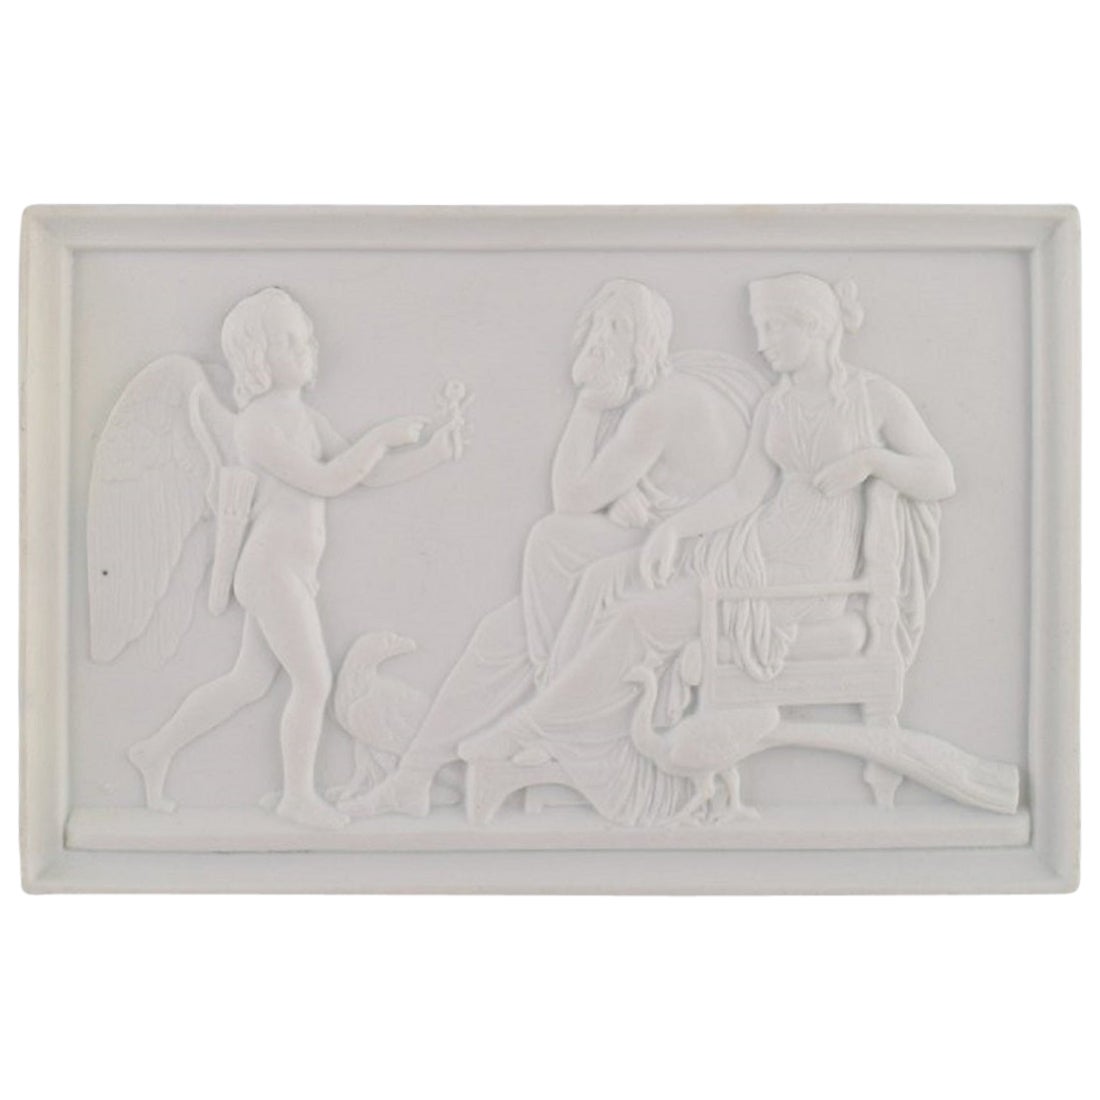 Bing and Grøndahl after Thorvaldsen, Antique Biscuit Wall Plaque, 1870s / 80s For Sale